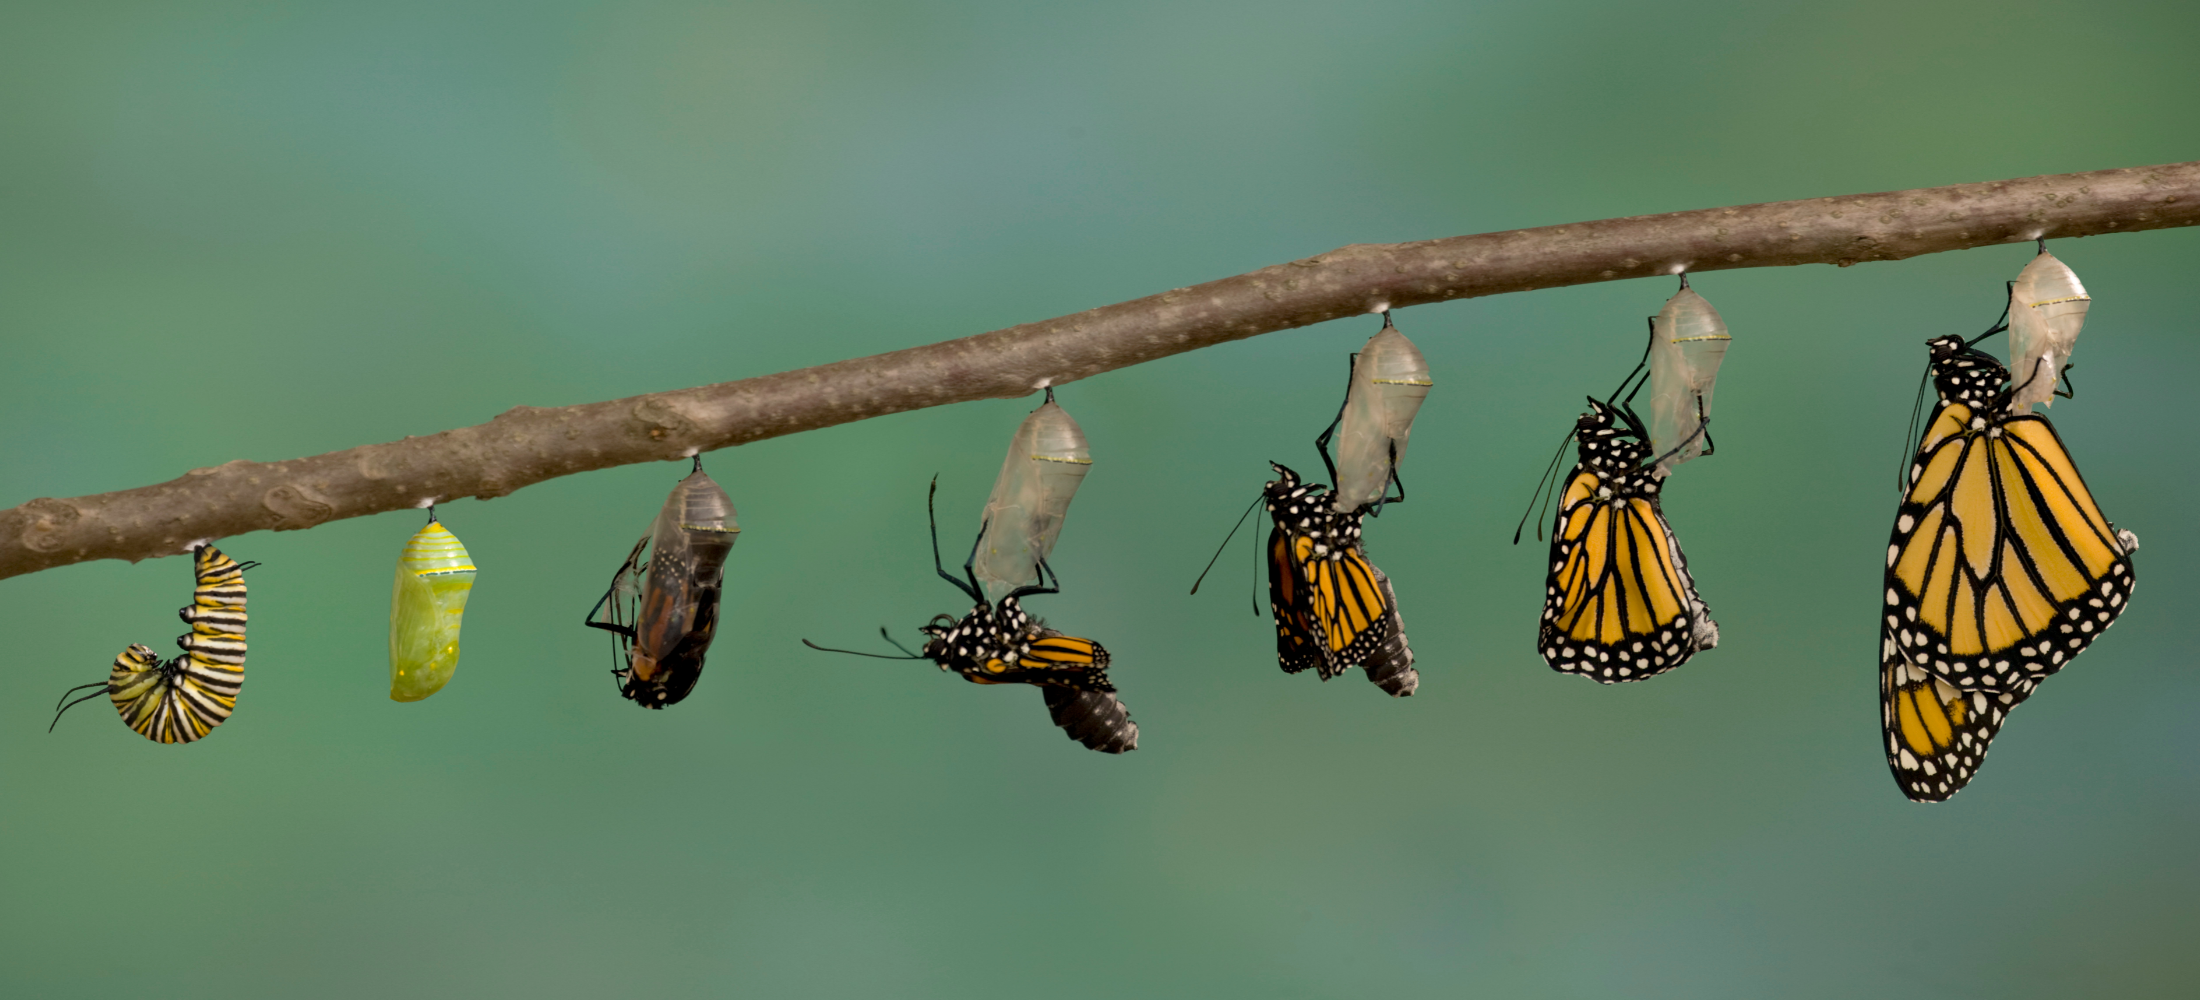 Life cycle of a monarch butterfly